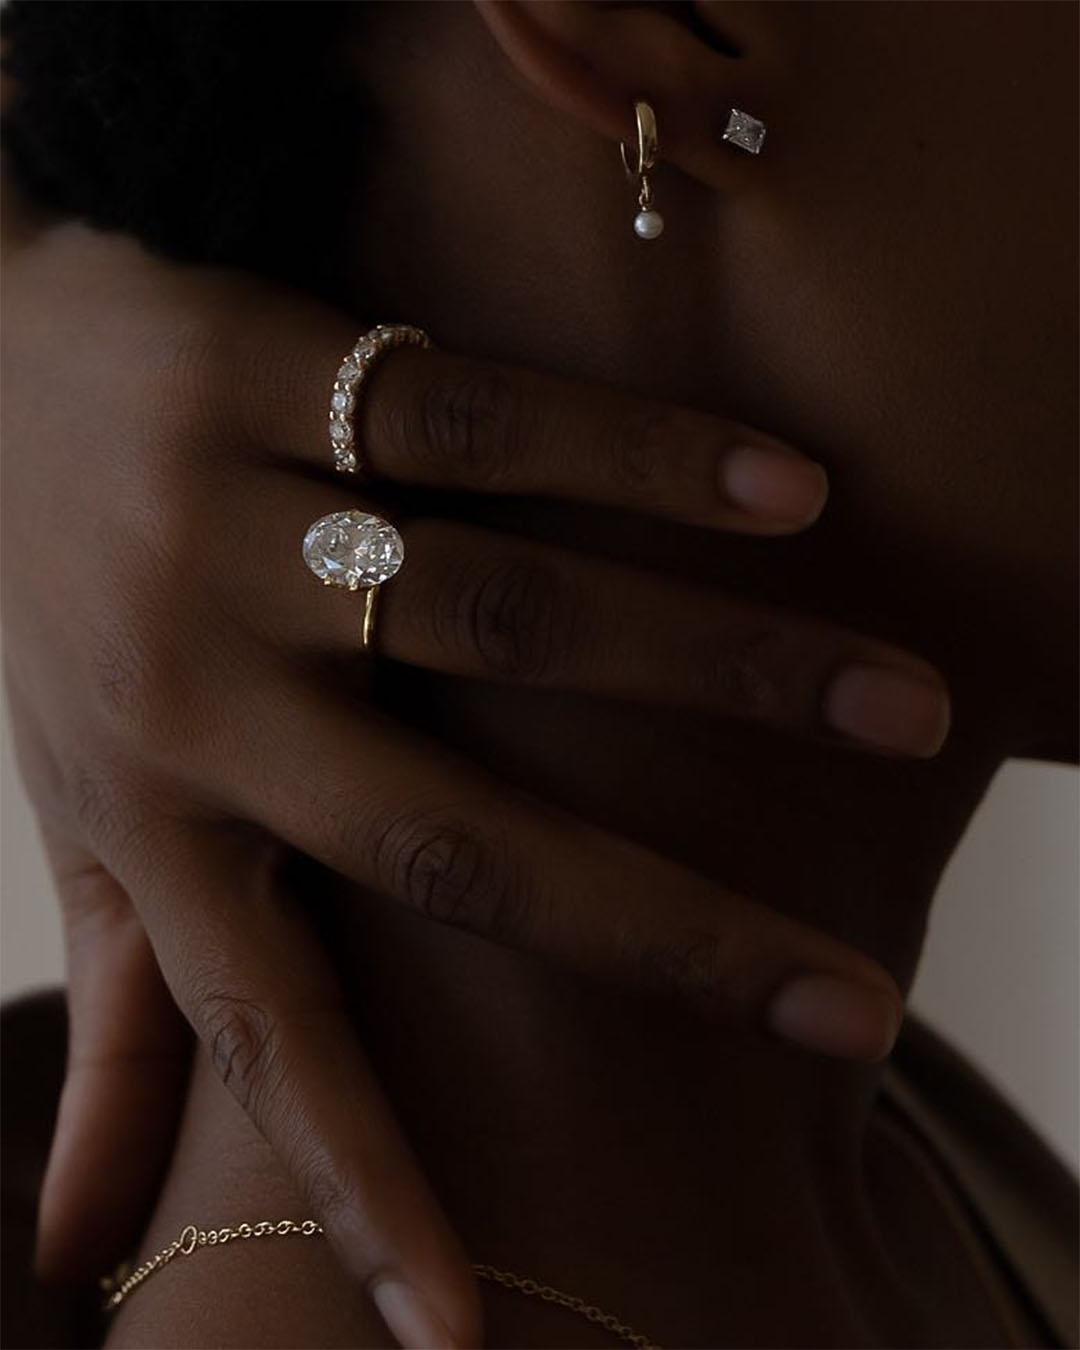 A woman with rings and earrings from The Diamod Shop.